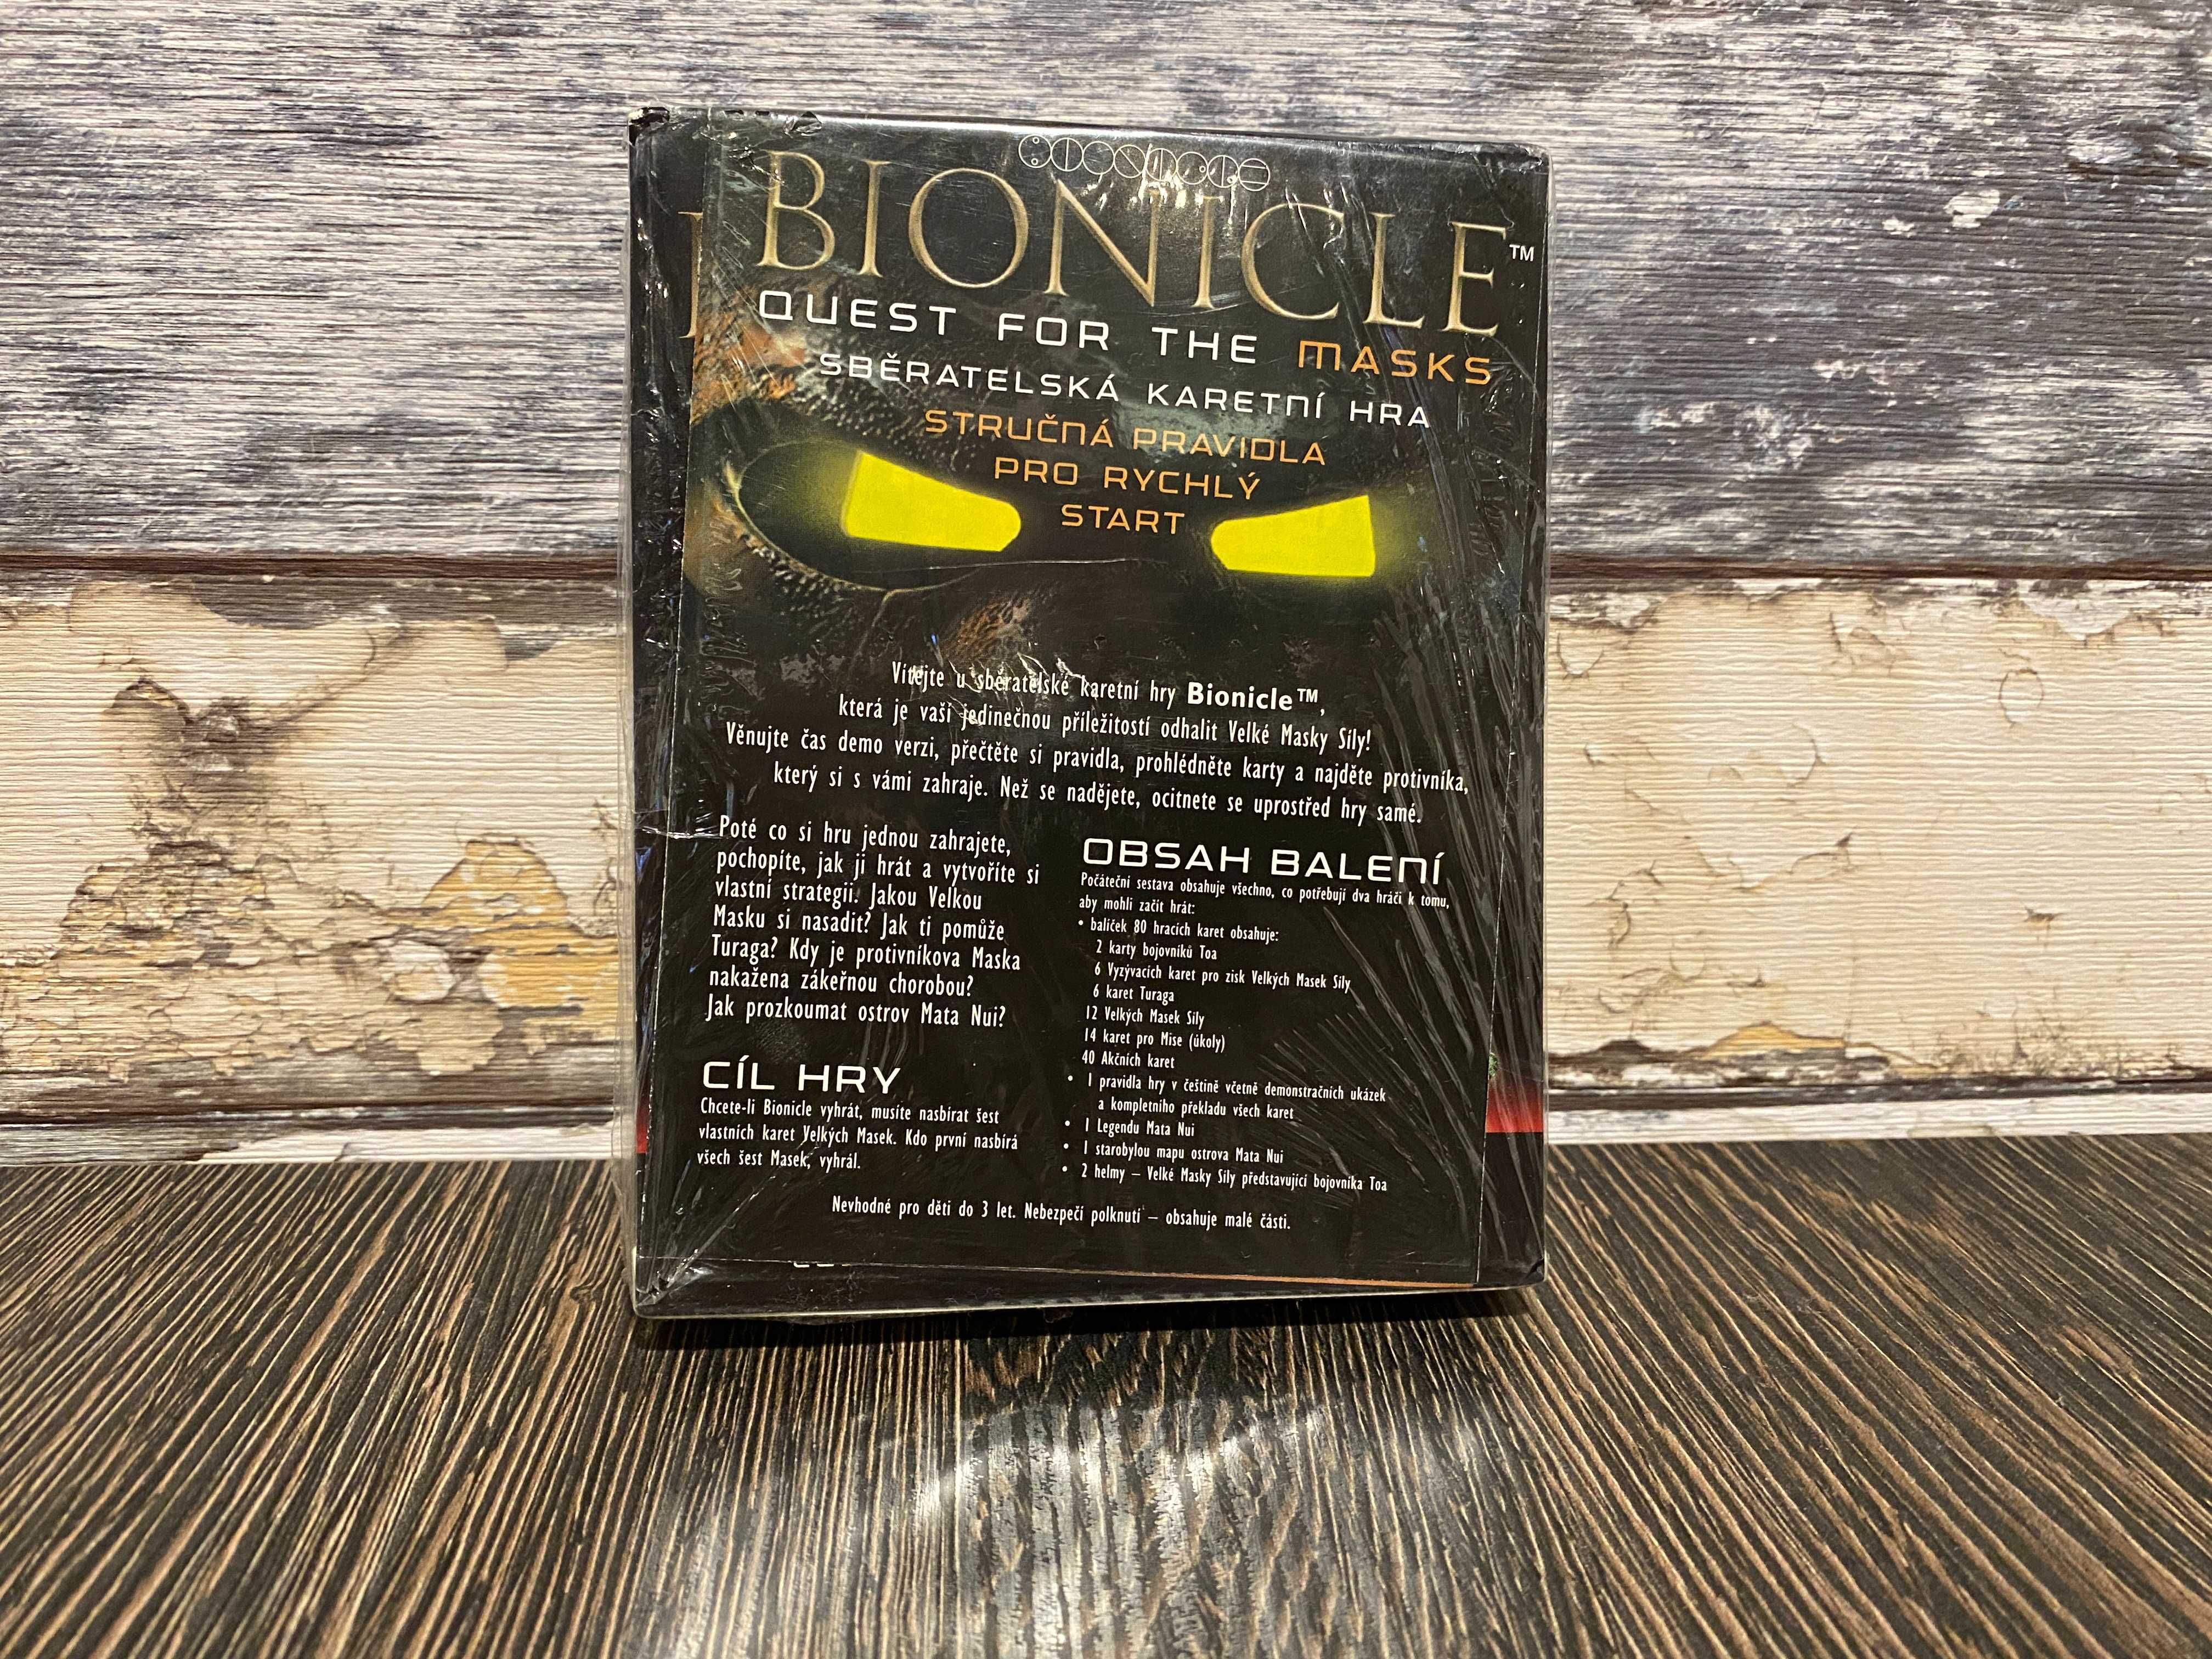 LEGO Bionicle Quest for the Masks Deck 2 gra nowa